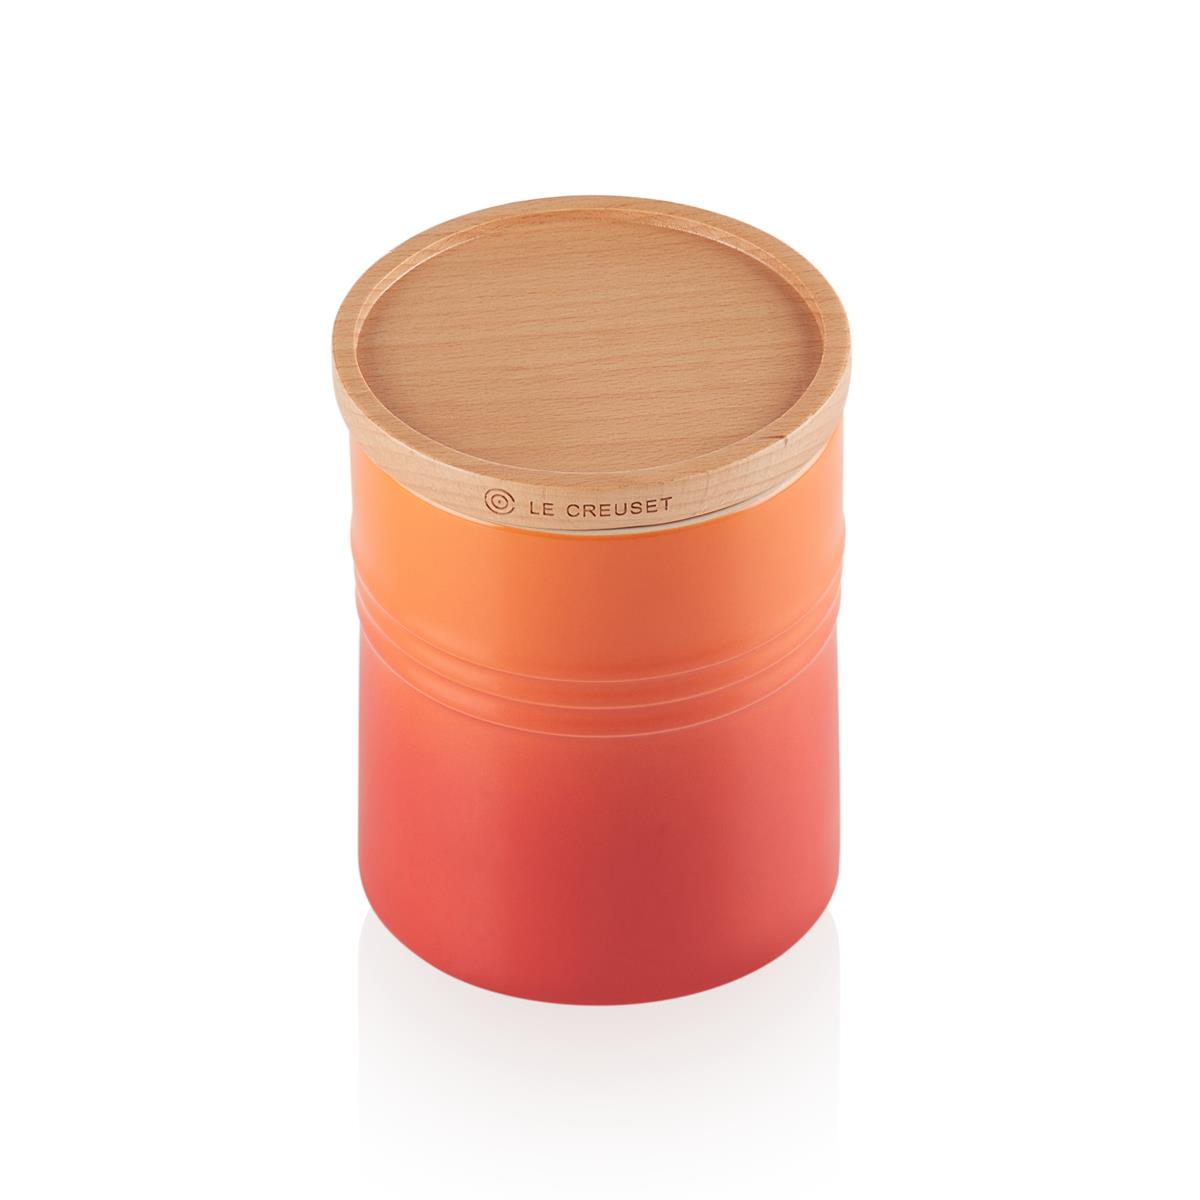 What temperature can the le creuset storage jar handle?